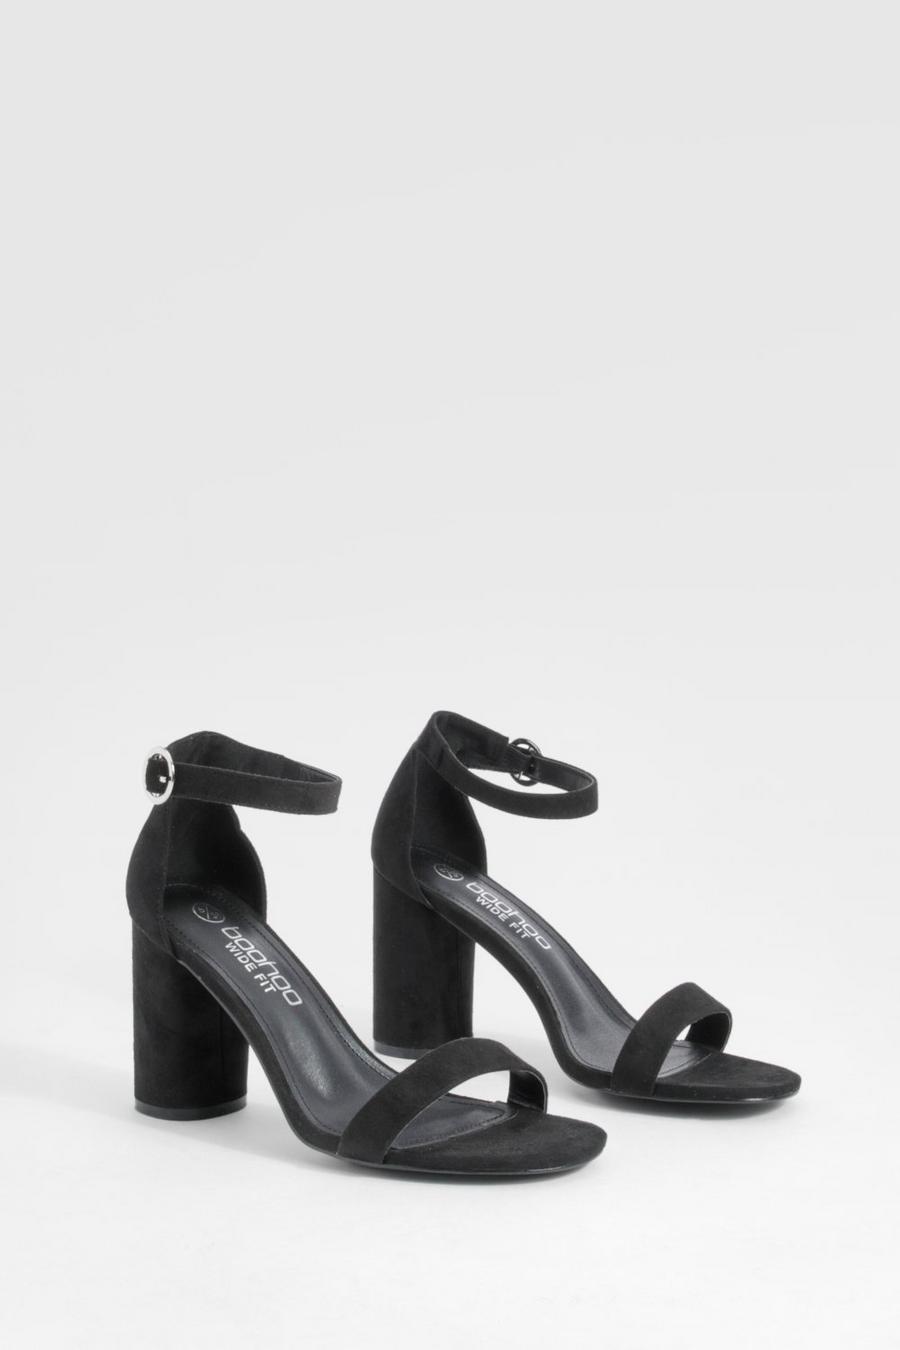 Black Wide Width Rounded Heel 2 Part Barely There Heels image number 1